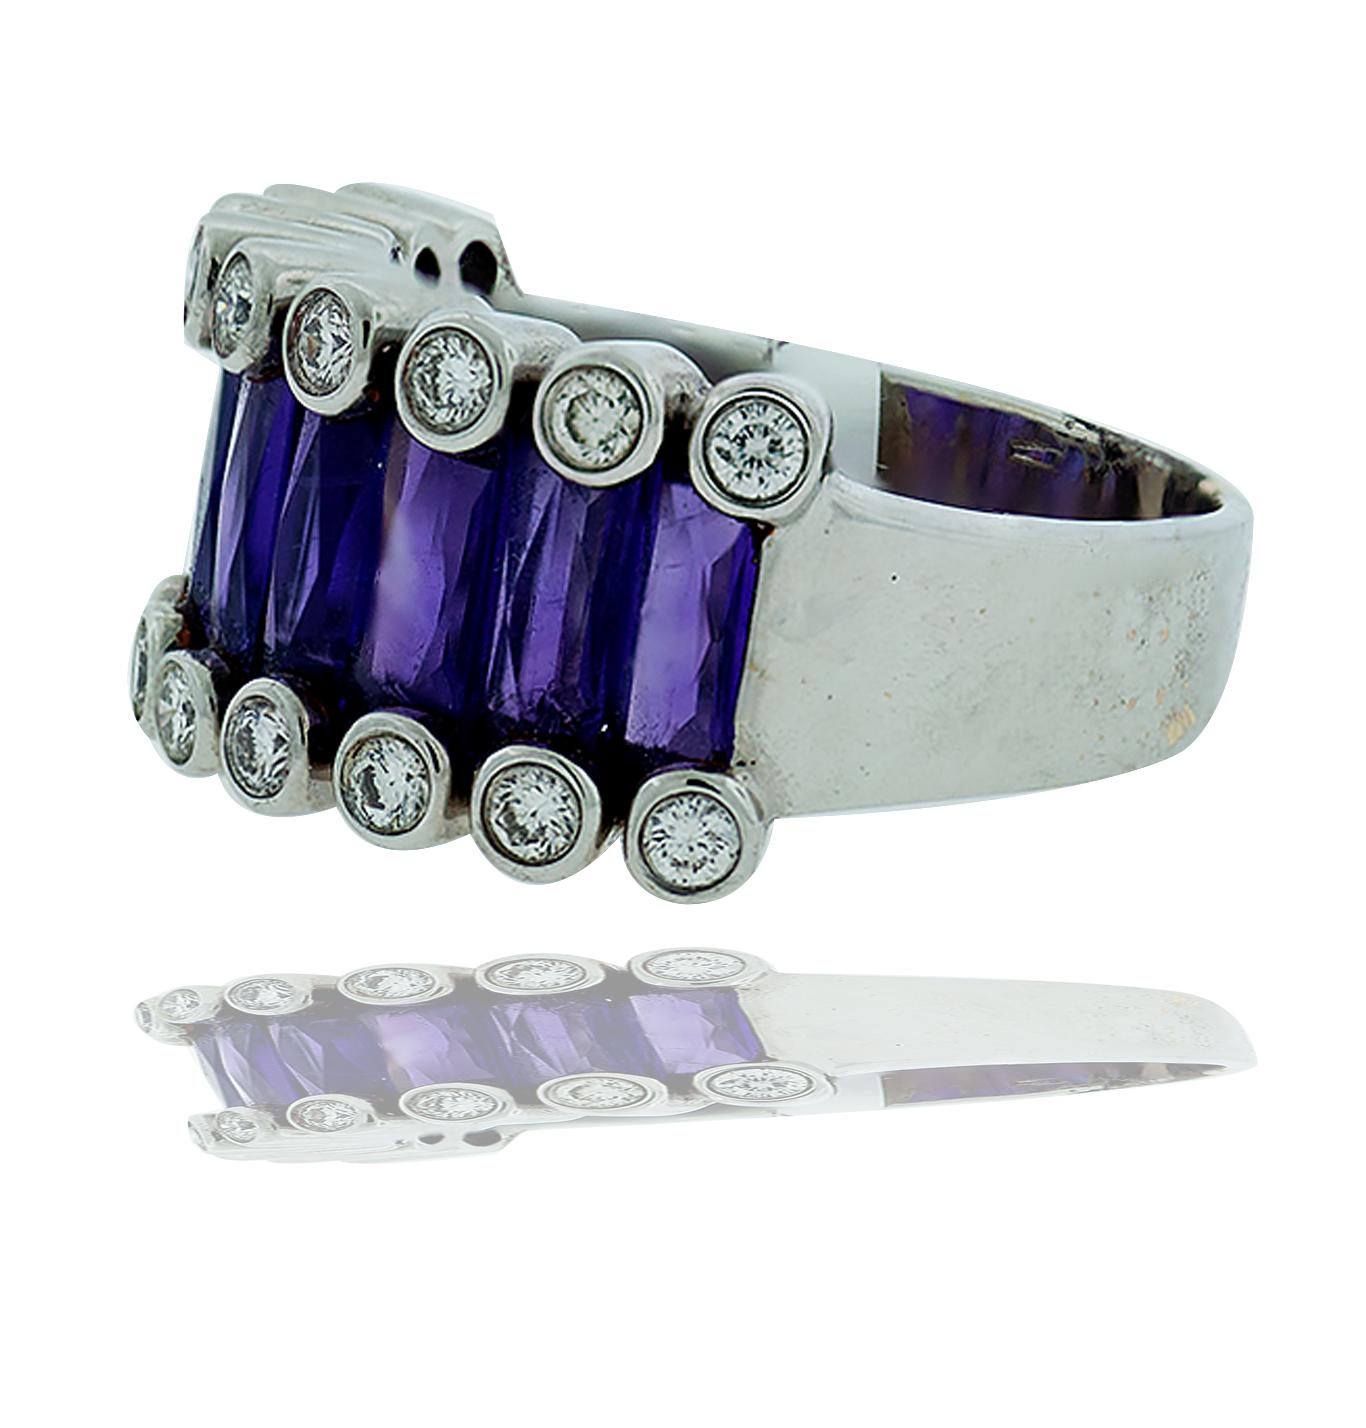 Wide, French Cut Amethyst, Band with Diamonds (18) Diamonds, set in round bezels the diamonds are G-H - VS quality and have a weight of (.035 carats each).60 Carat. Quality supportive ring, Metal is 18K white gold, weight of 11.30 grams.   There is